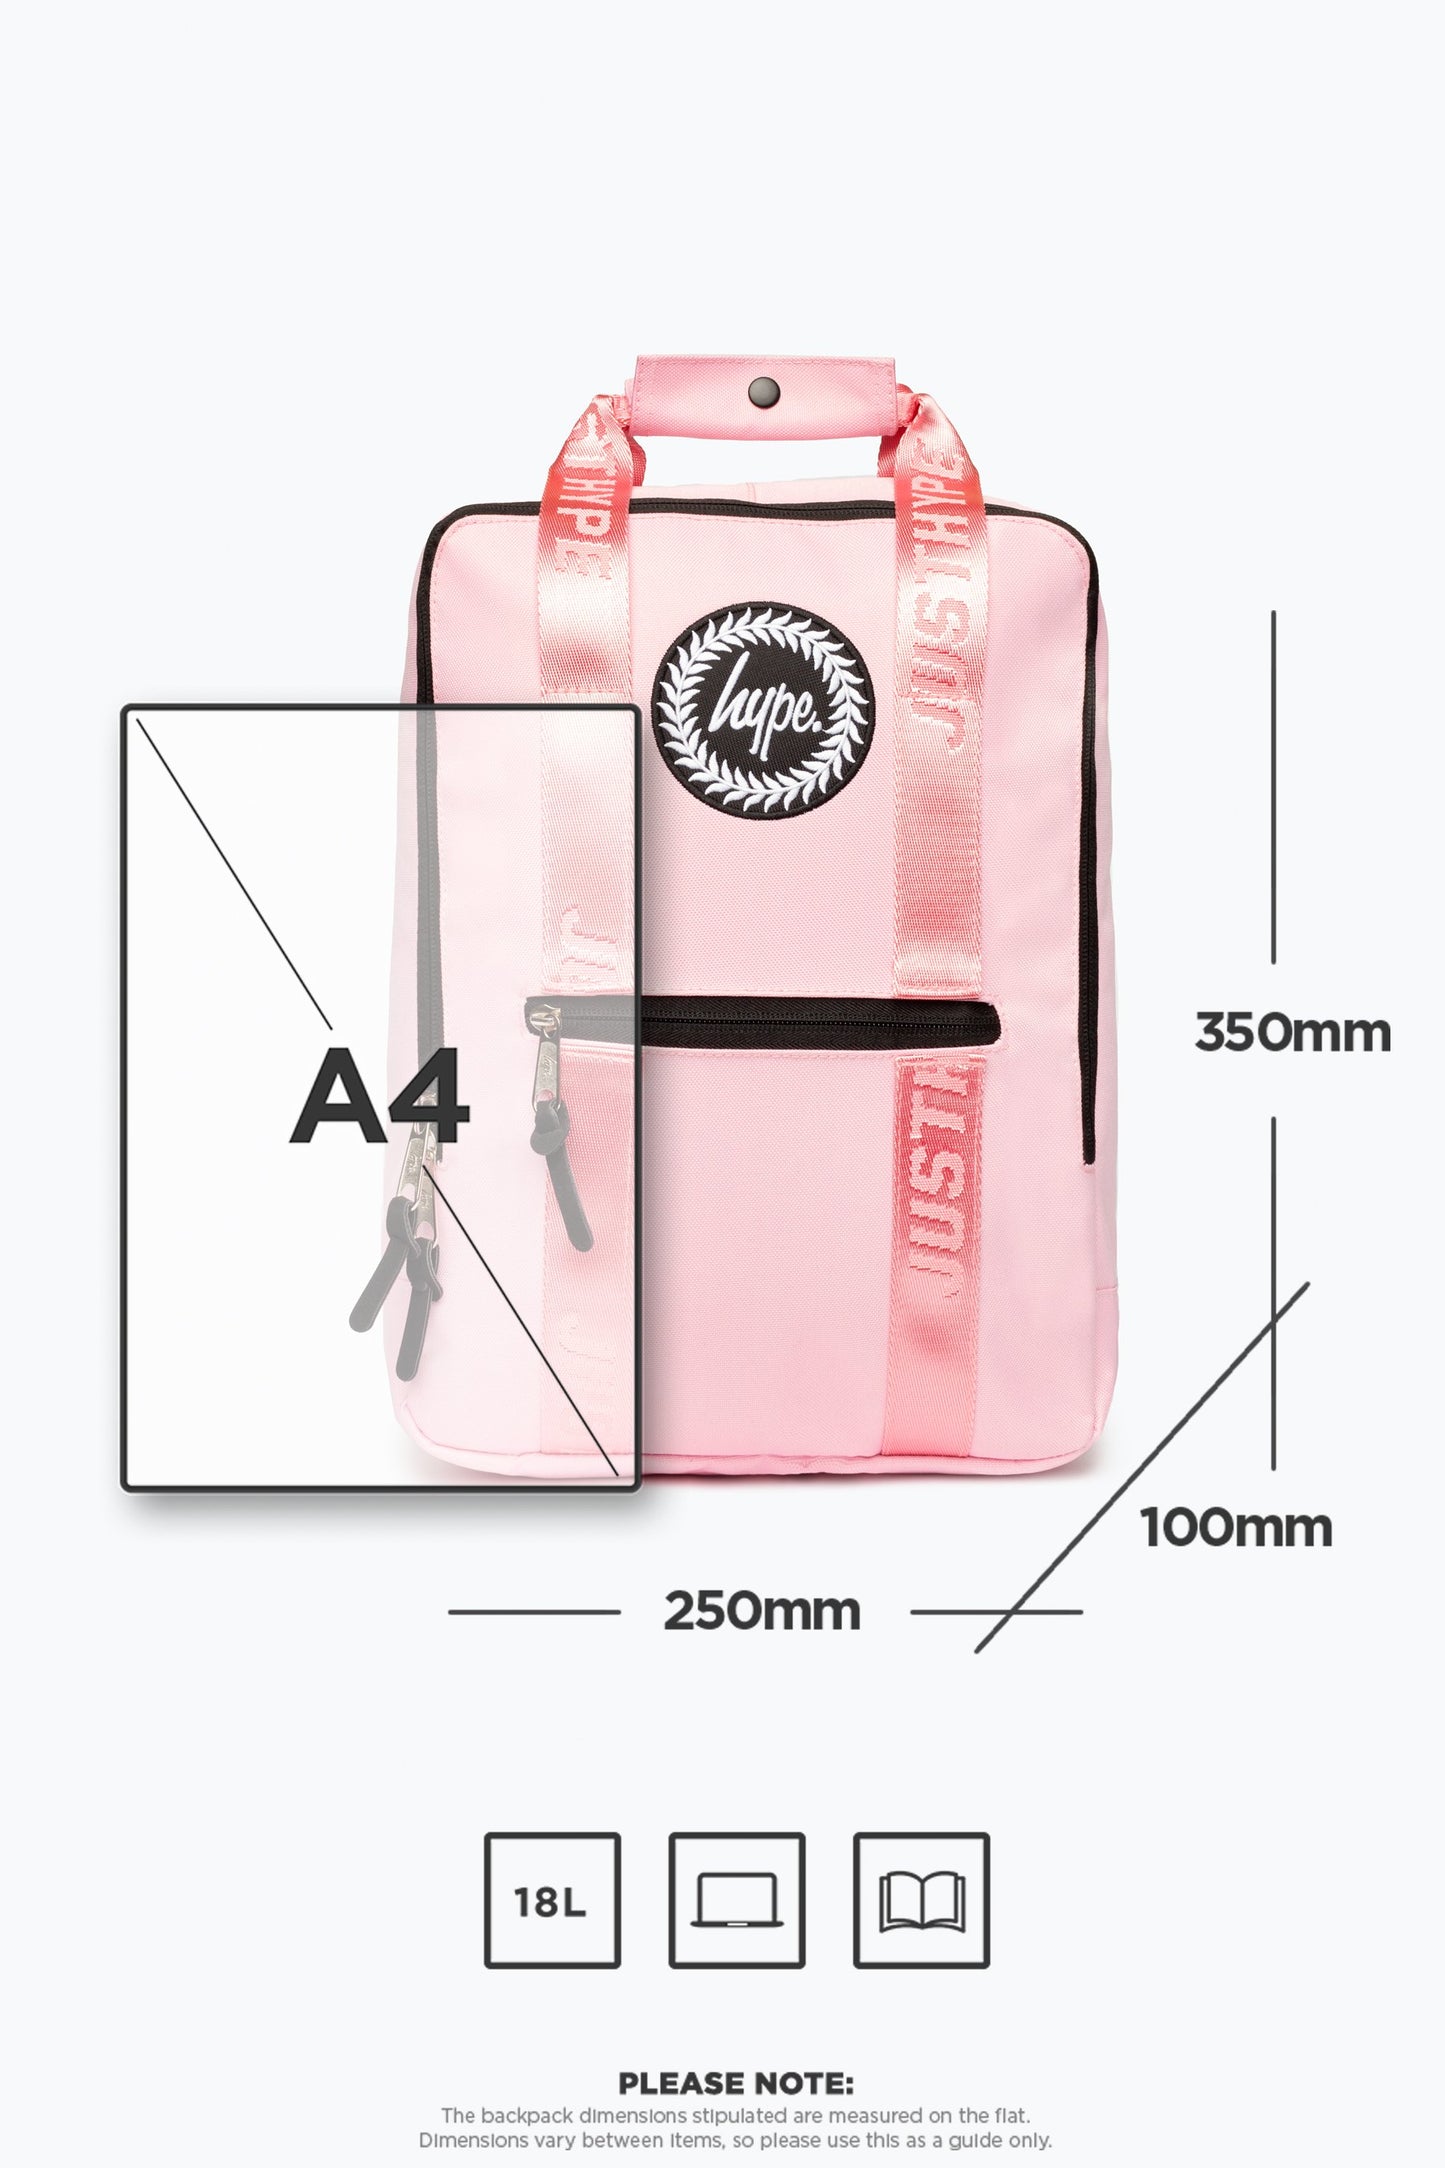 HYPE PINK BOXY BACKPACK